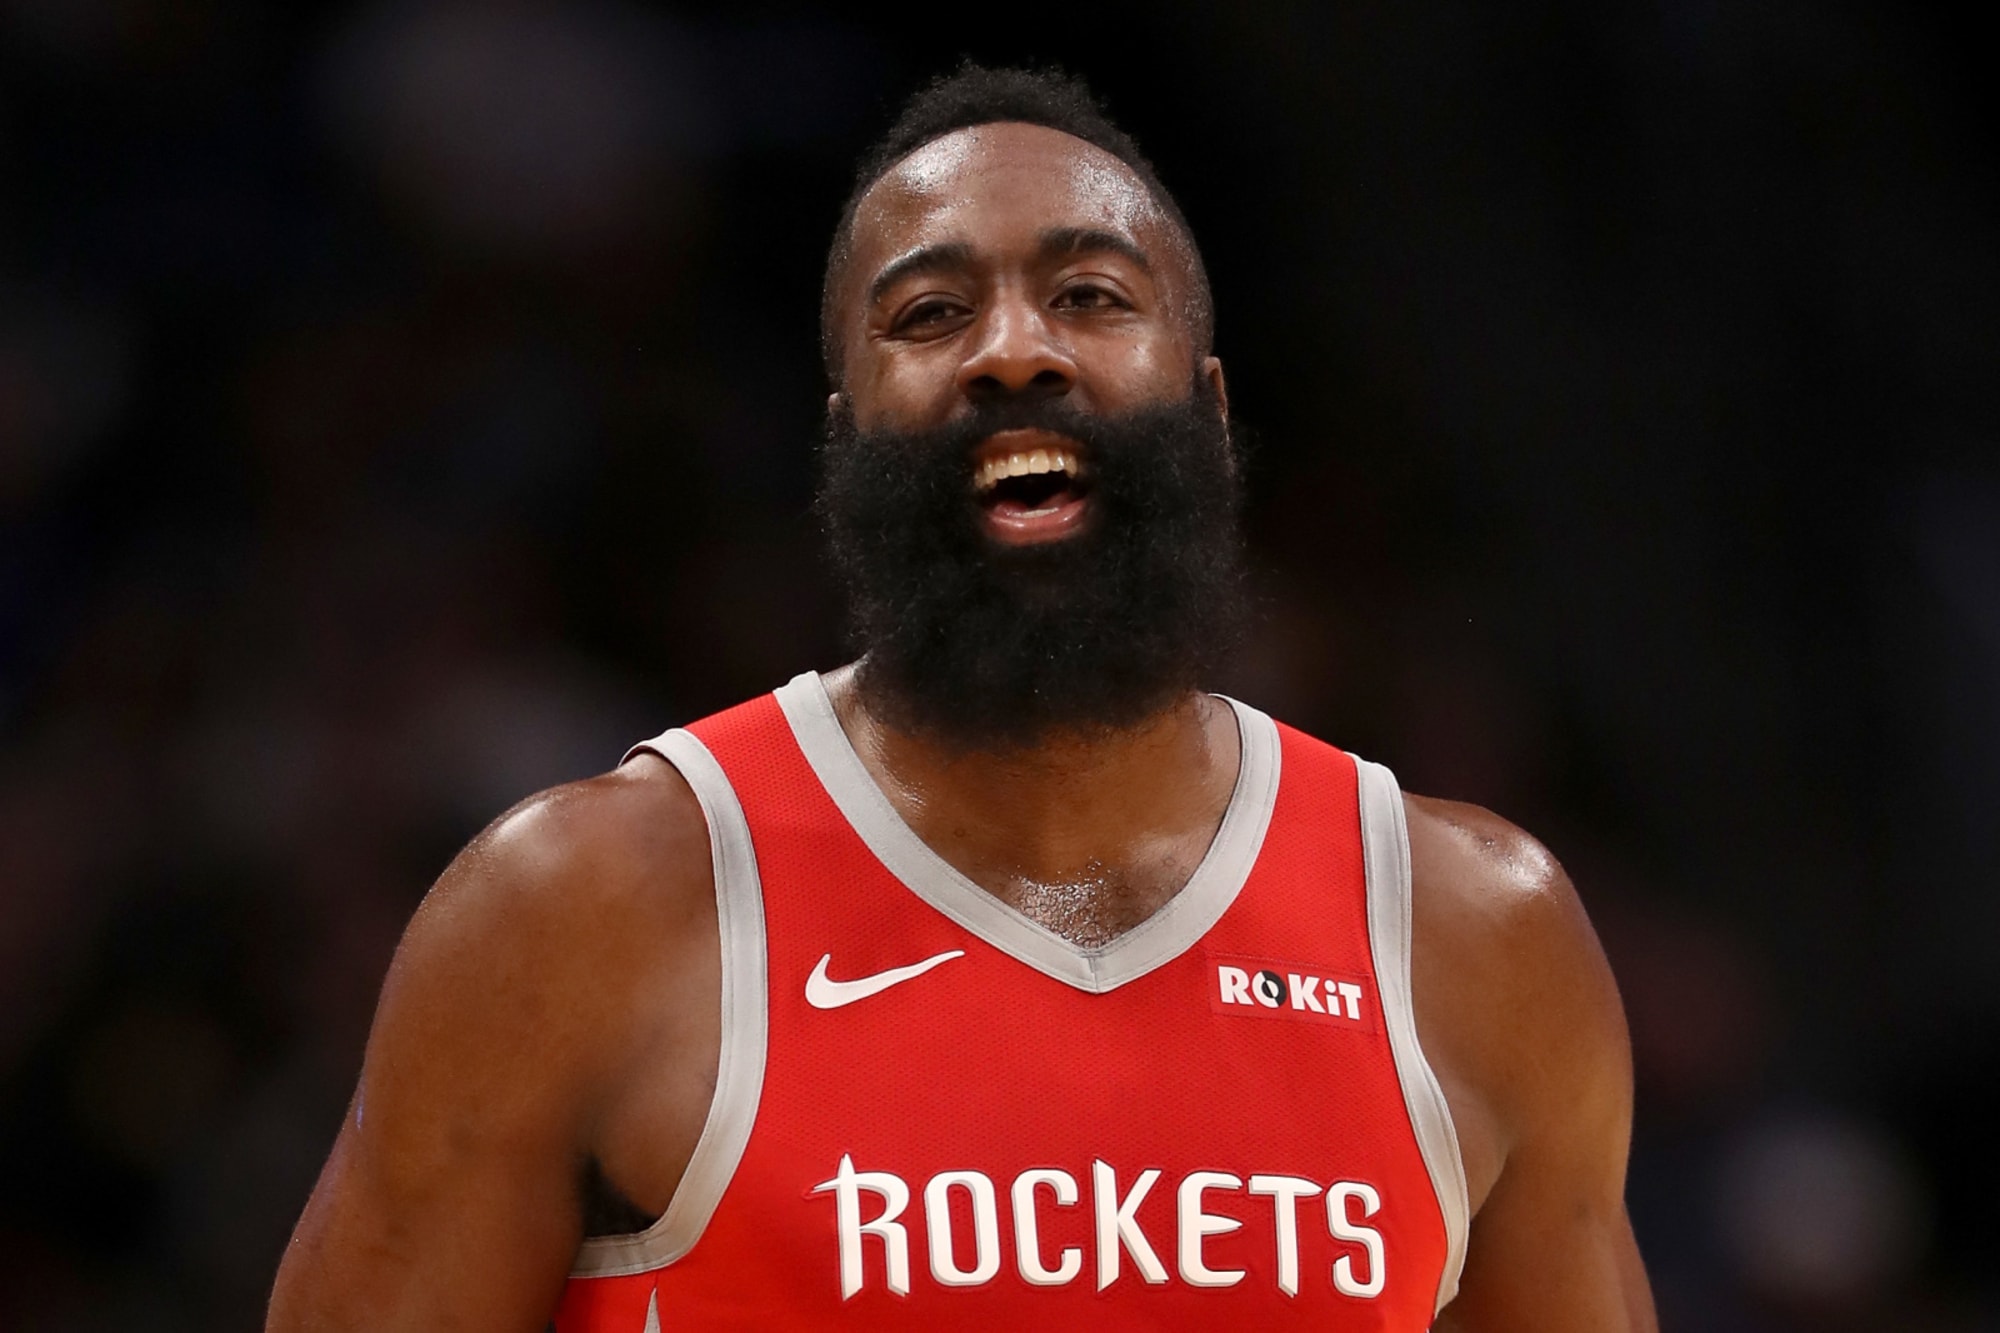 who is dating james harden